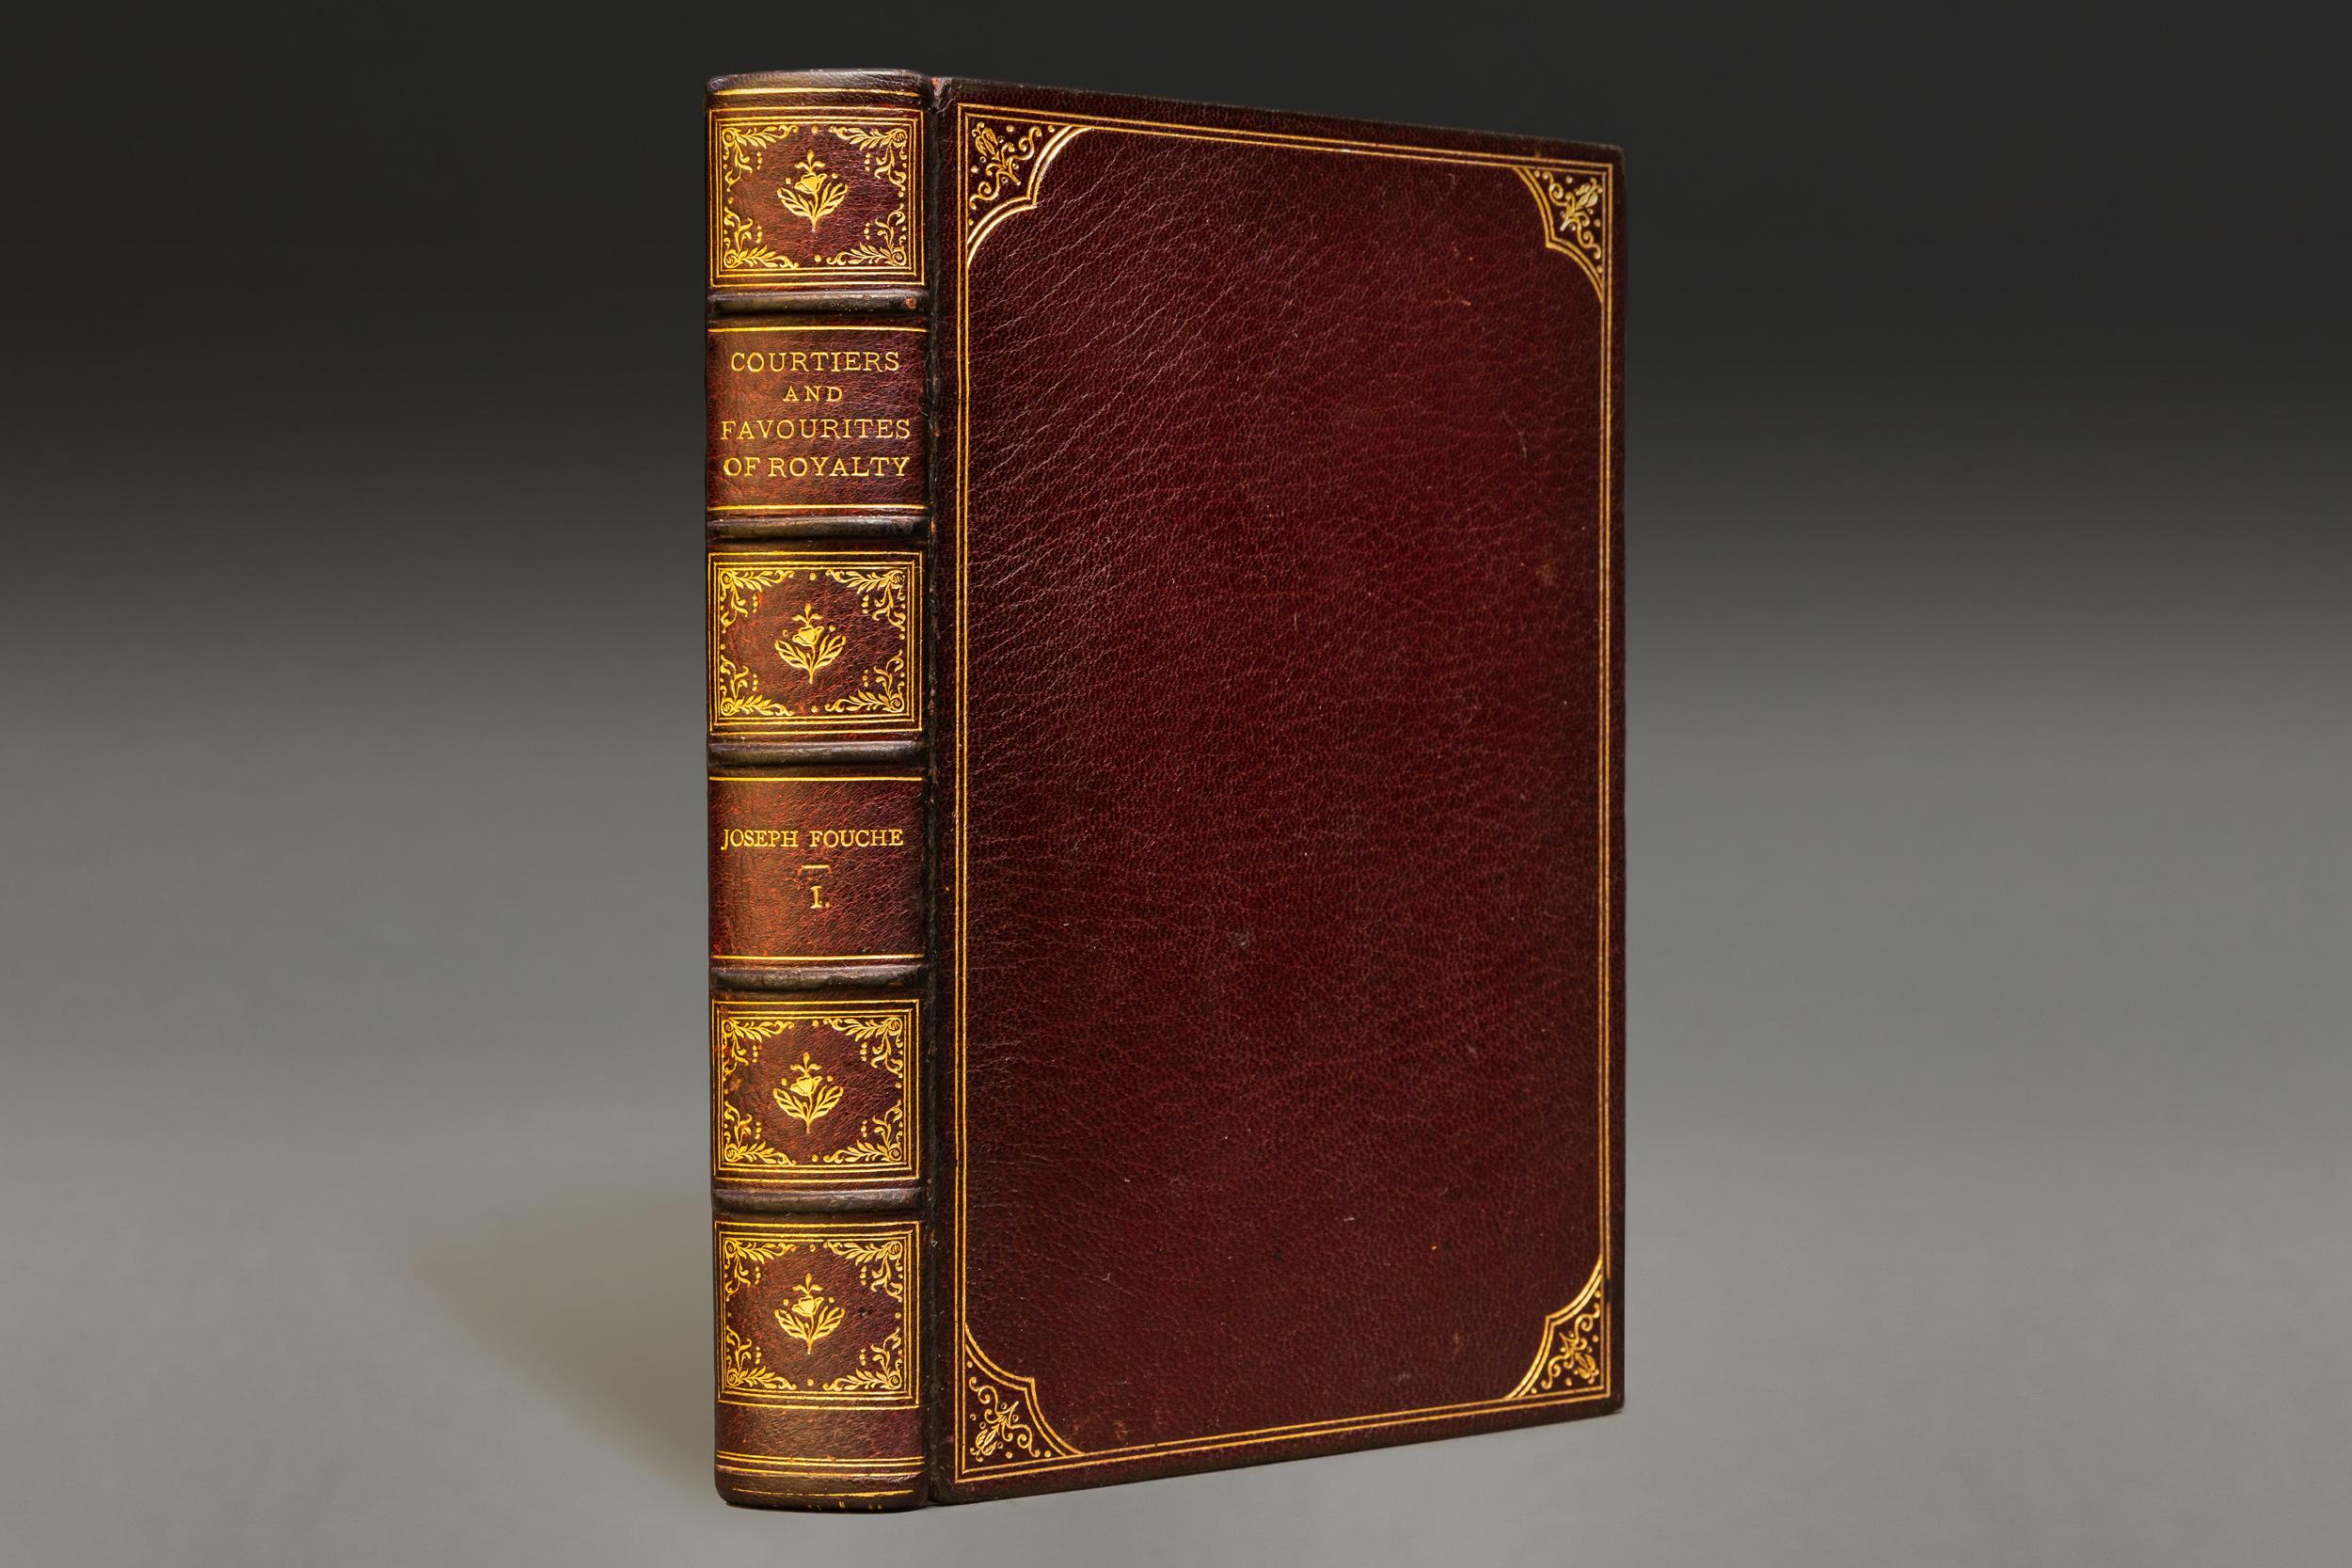 Leather 20 Volumes. Courtiers and Favourites of Royalty: Madame DuBarry, Henry IV etc.